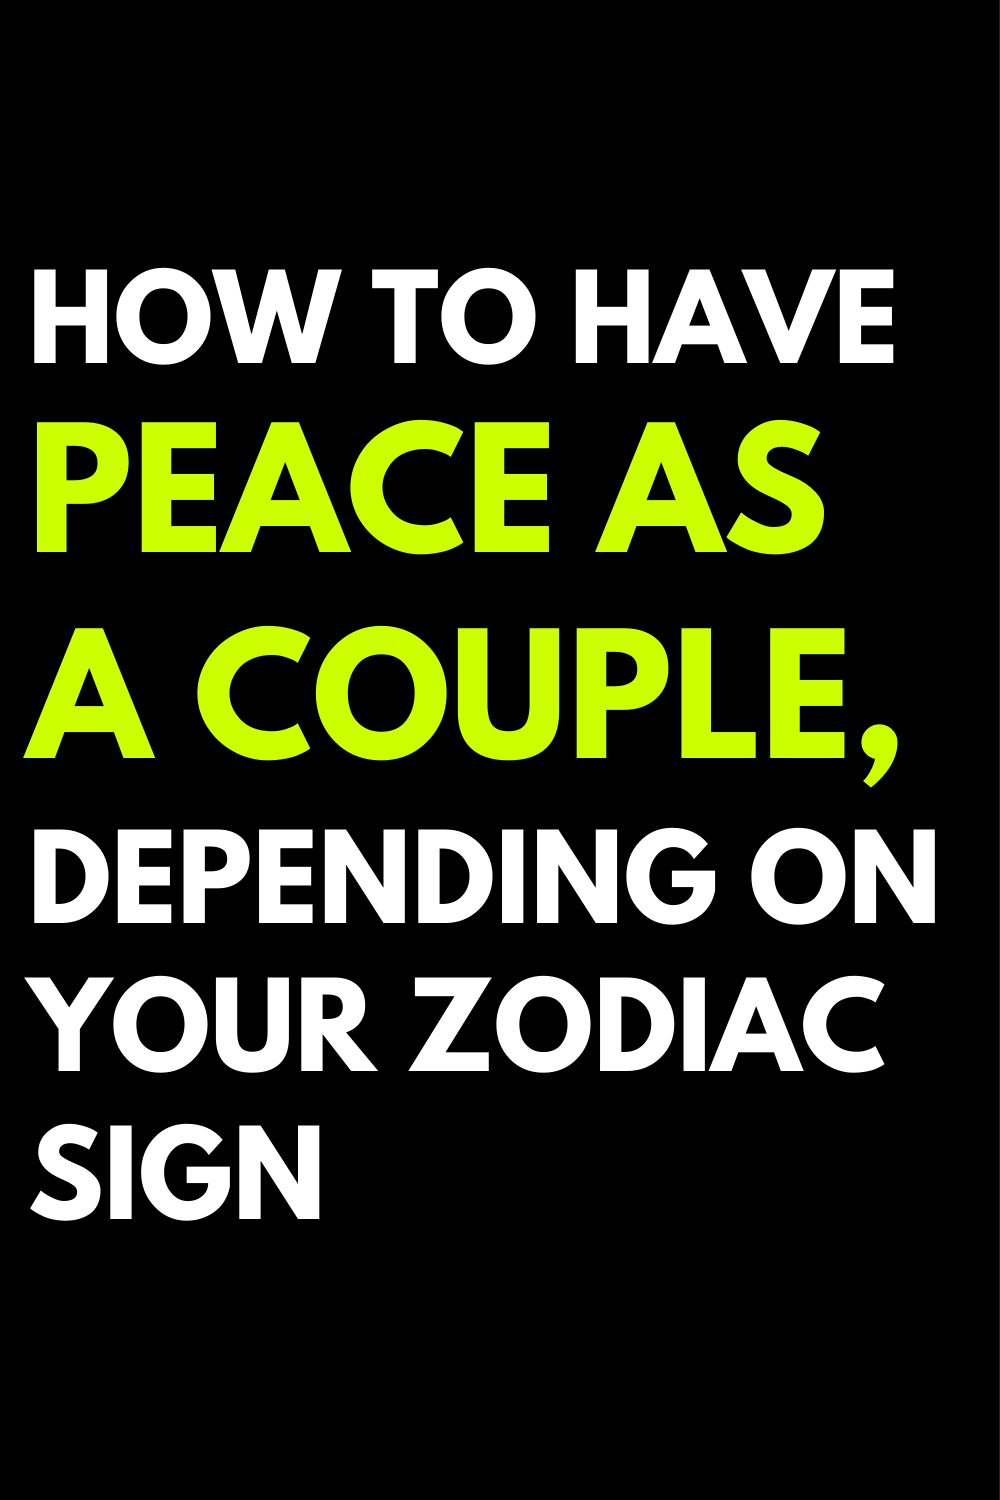 How to have peace as a couple, depending on your zodiac sign